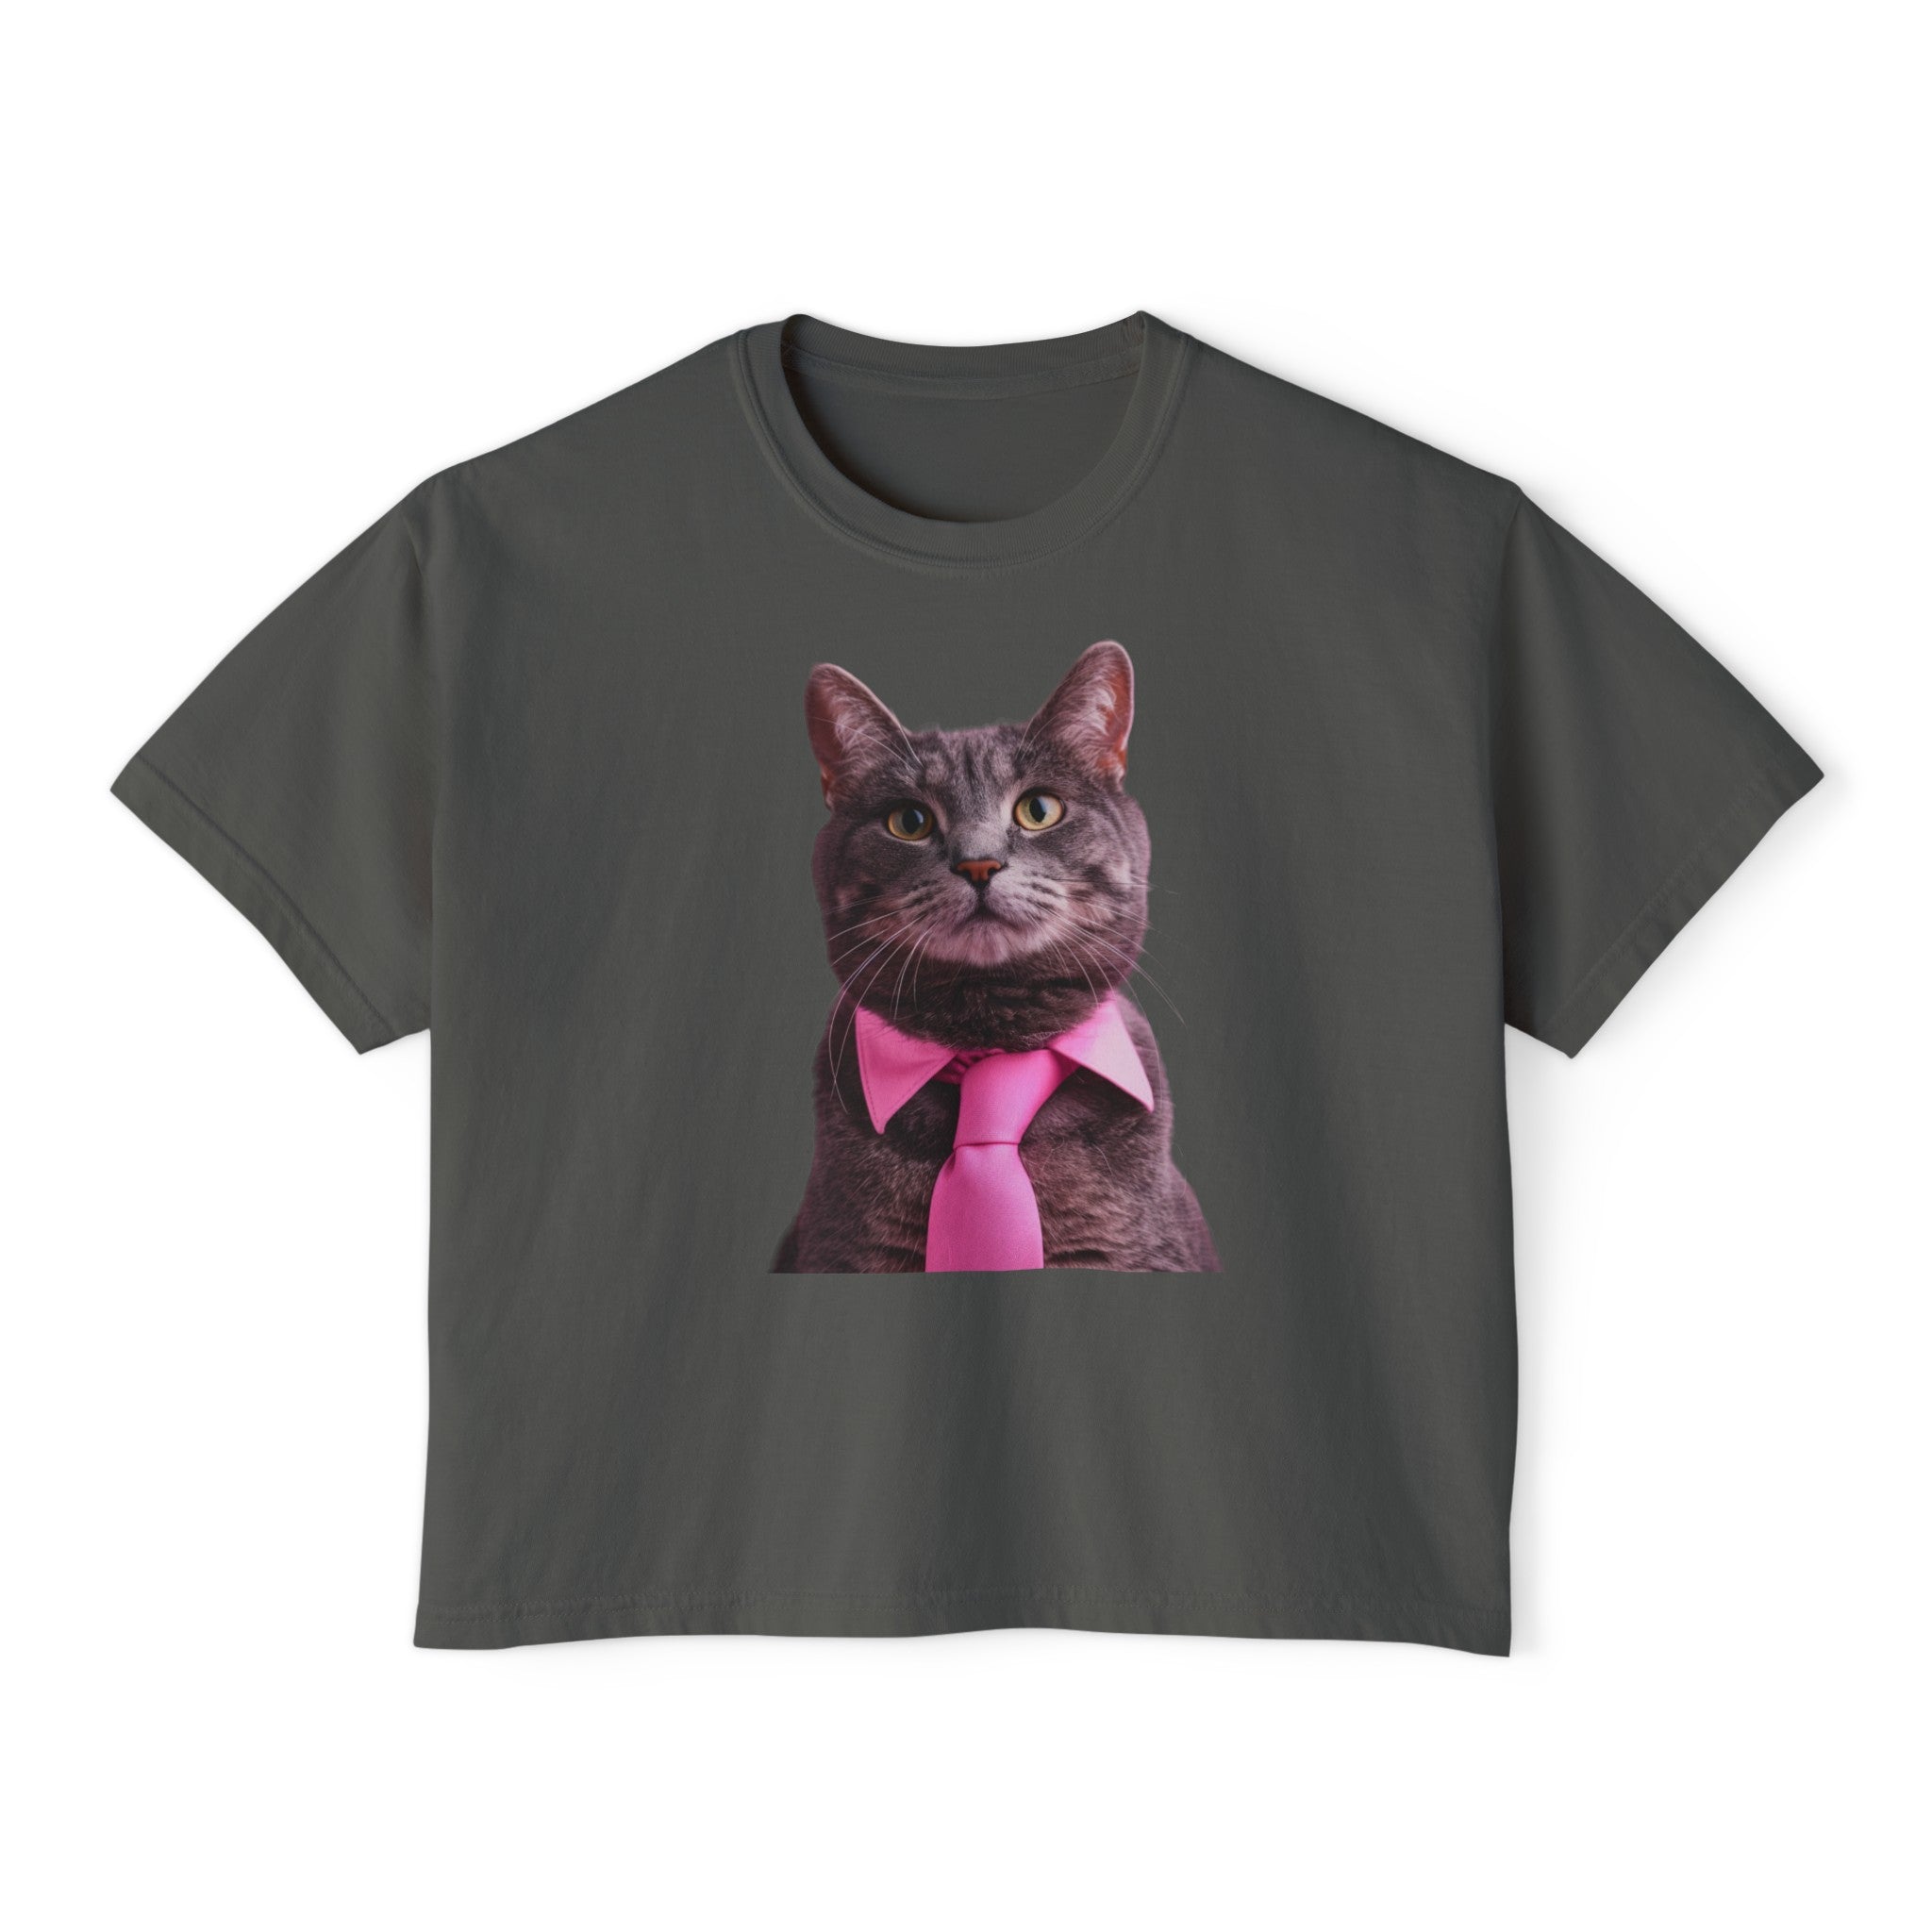 The image features a trendy women's boxy tee in a light, appealing color. It showcases a detailed, artistic illustration of a tabby cat wearing a pink tie, perfectly positioned to catch the eye and evoke smiles. The fabric's quality and the tee's stylish cut are evident, promising a fashionable and comfortable addition to any wardrobe.